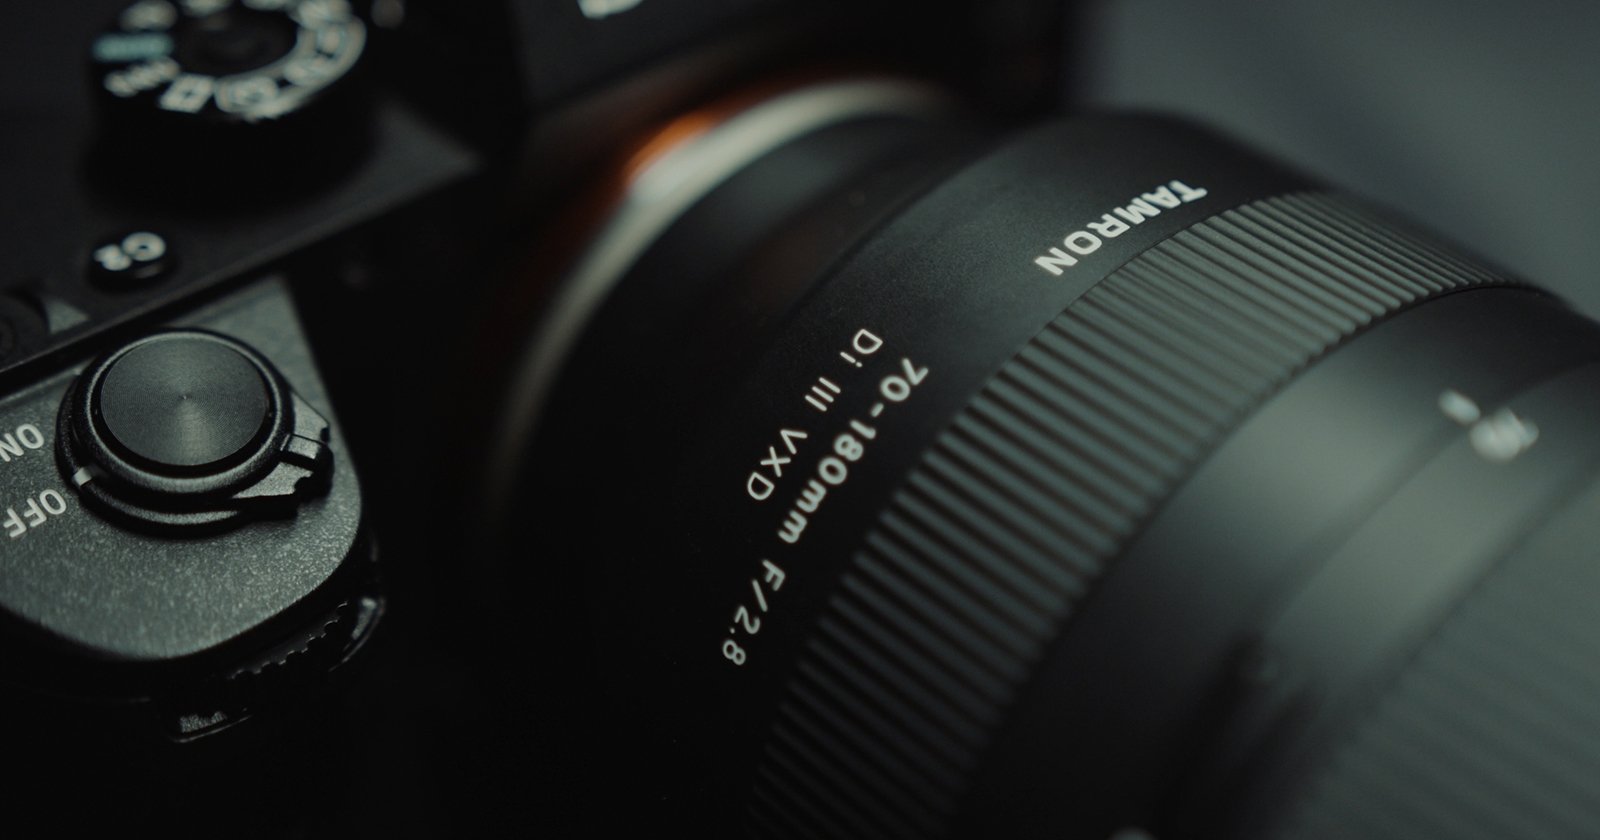 PSA: Some Tamron 70-180mm f/2.8 Lenses Have a Calibration Issue ...